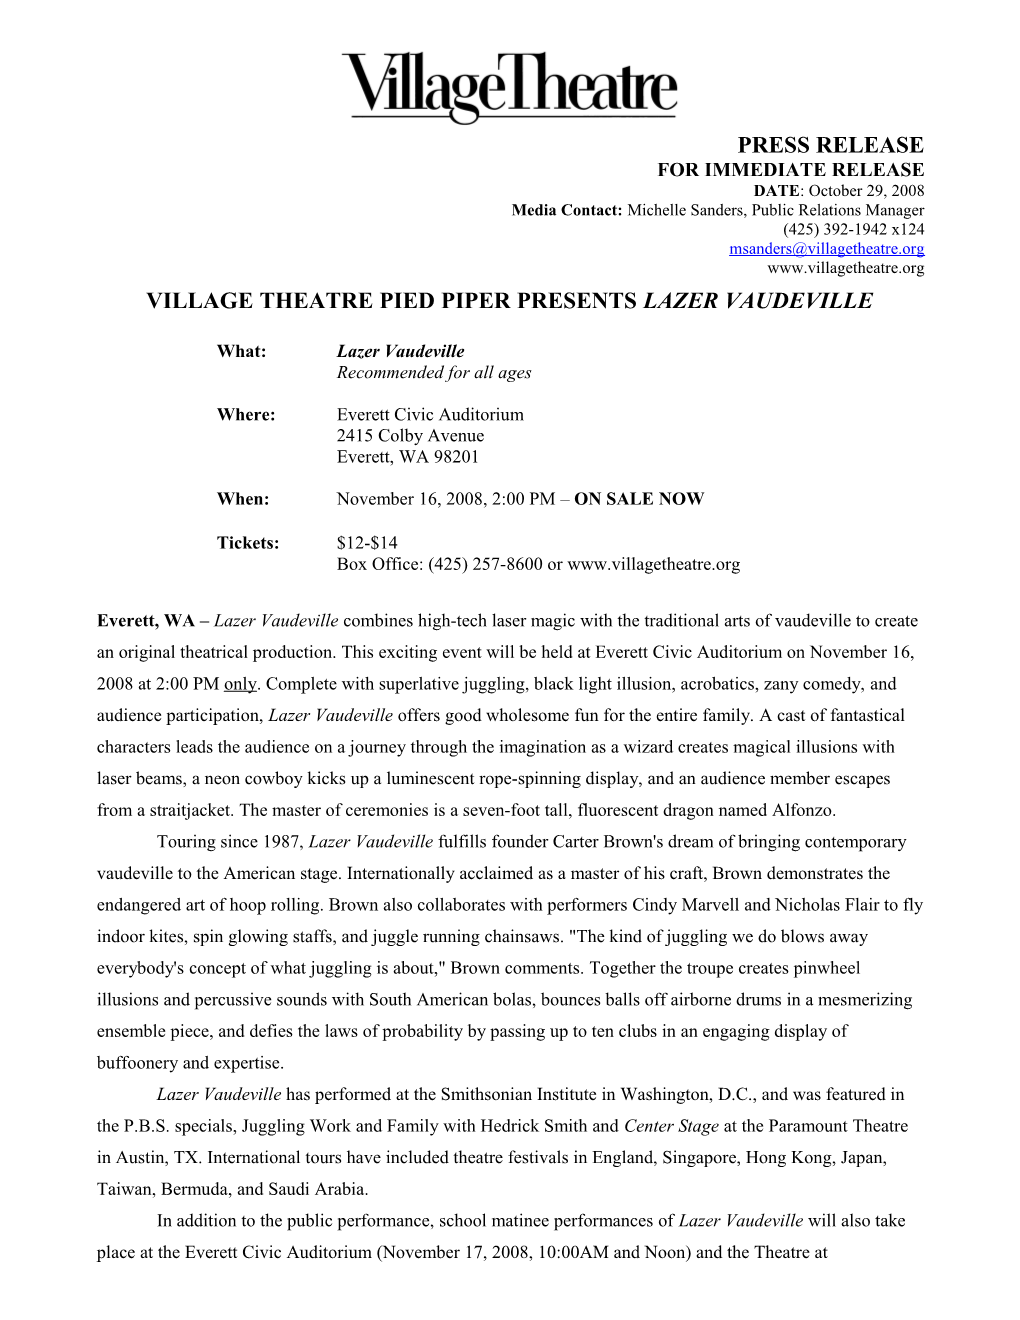 FOR IMMEDIATE RELEASE: March 22, 2002 s1